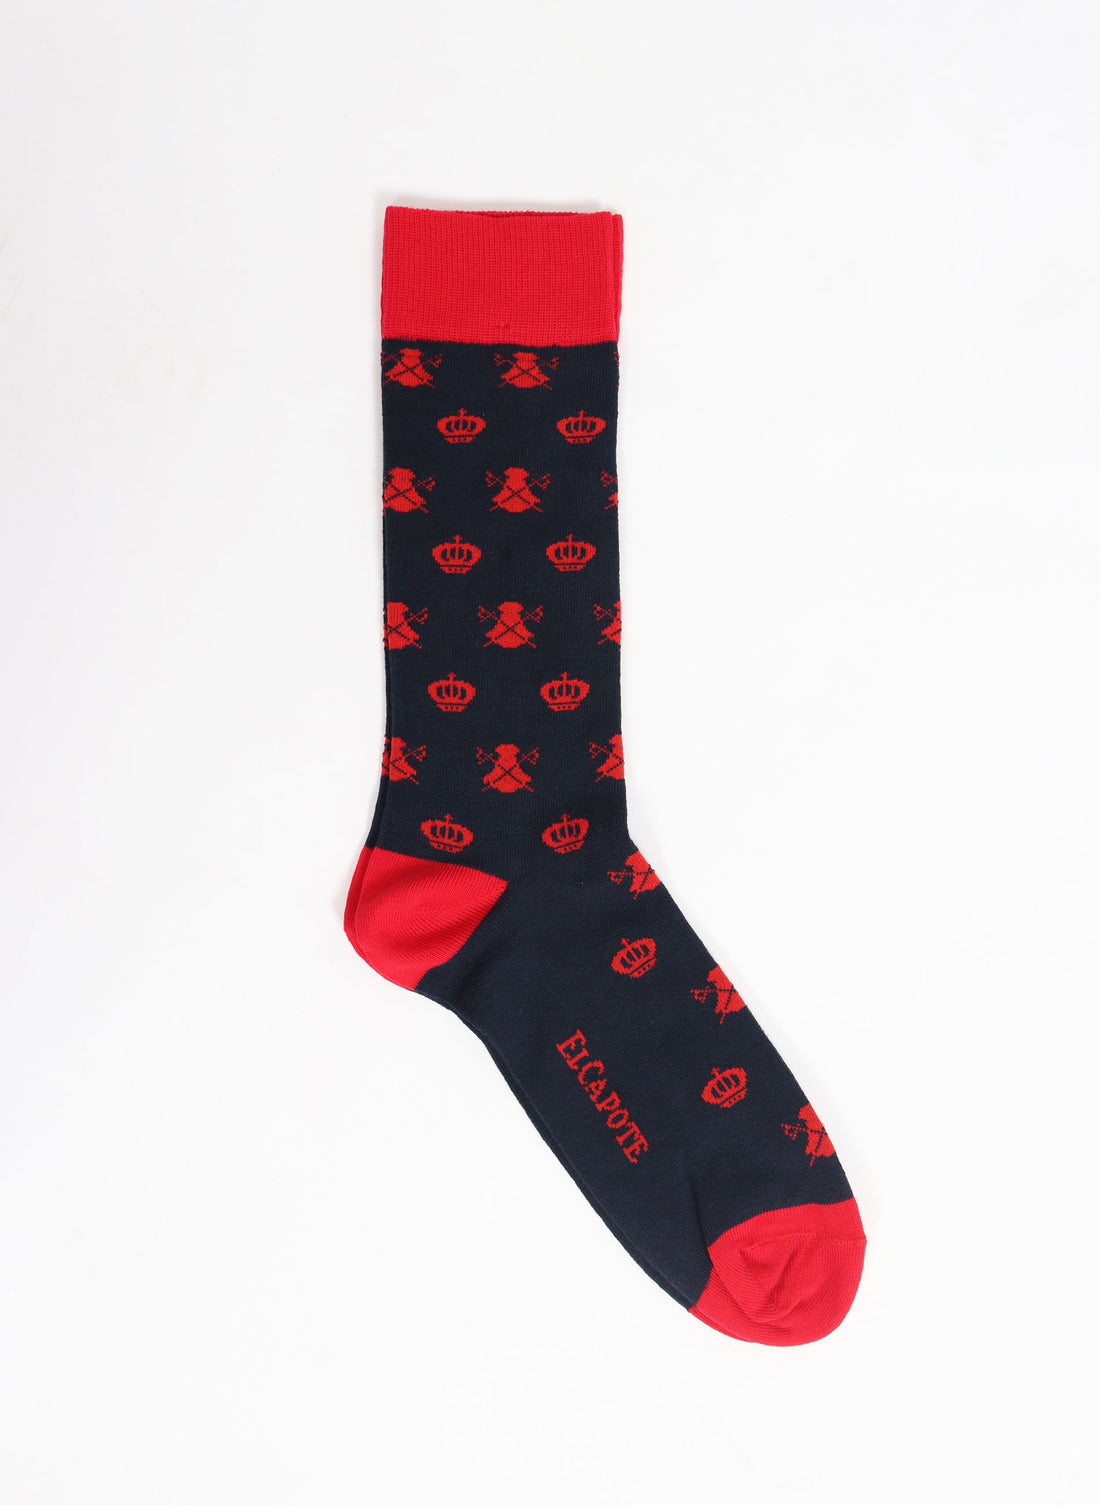 Navy Blue Sock with Red Capes and Crowns